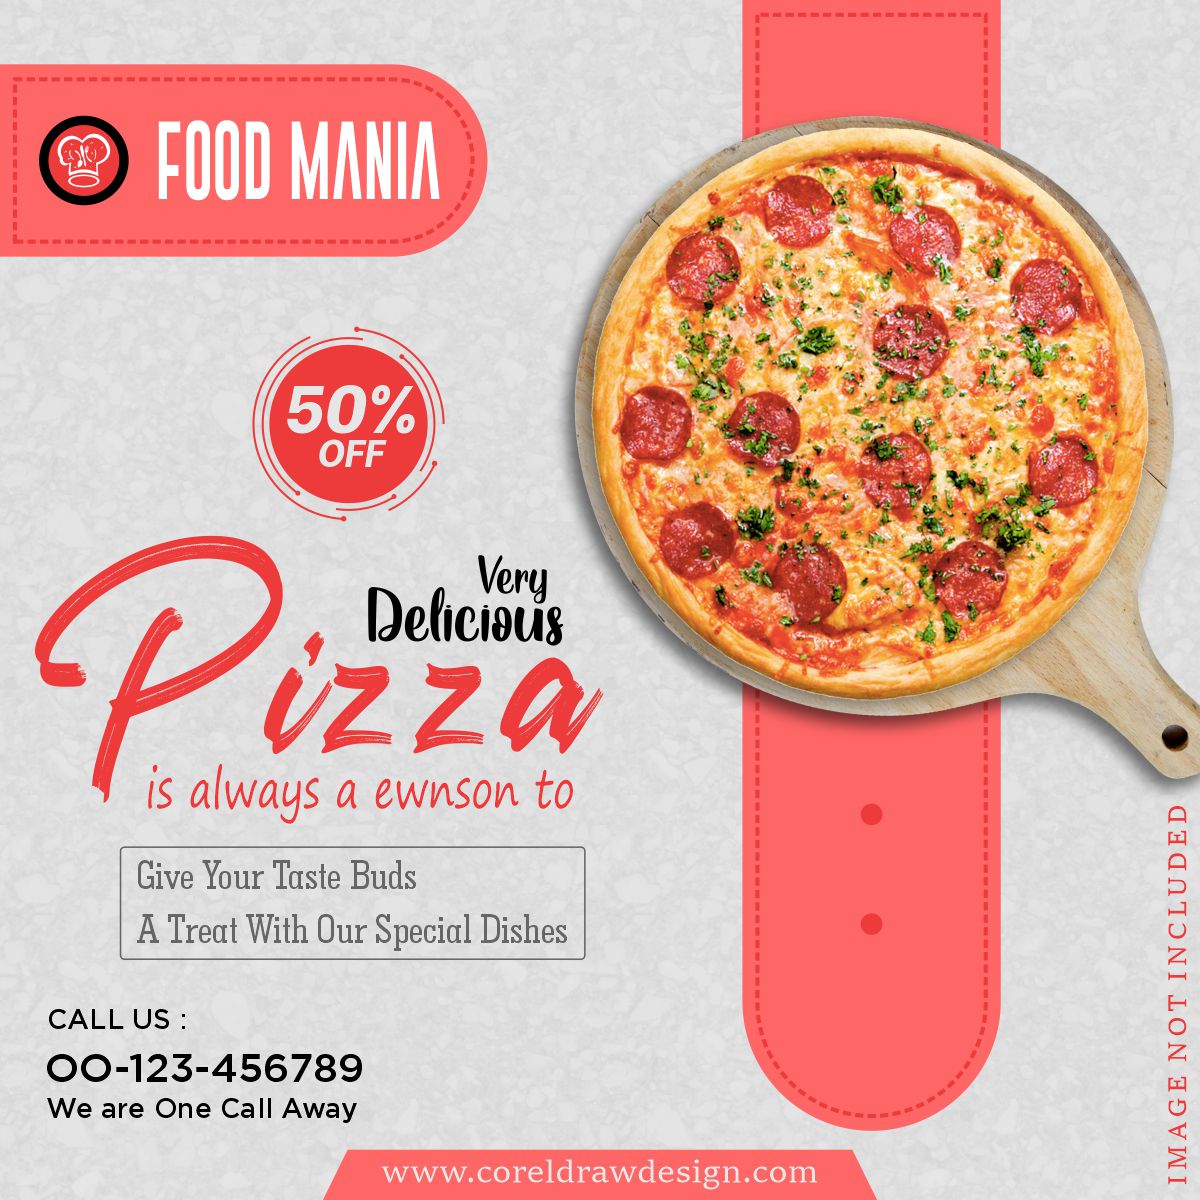 Very Delicious Pizza Restaurant Food Banner Template